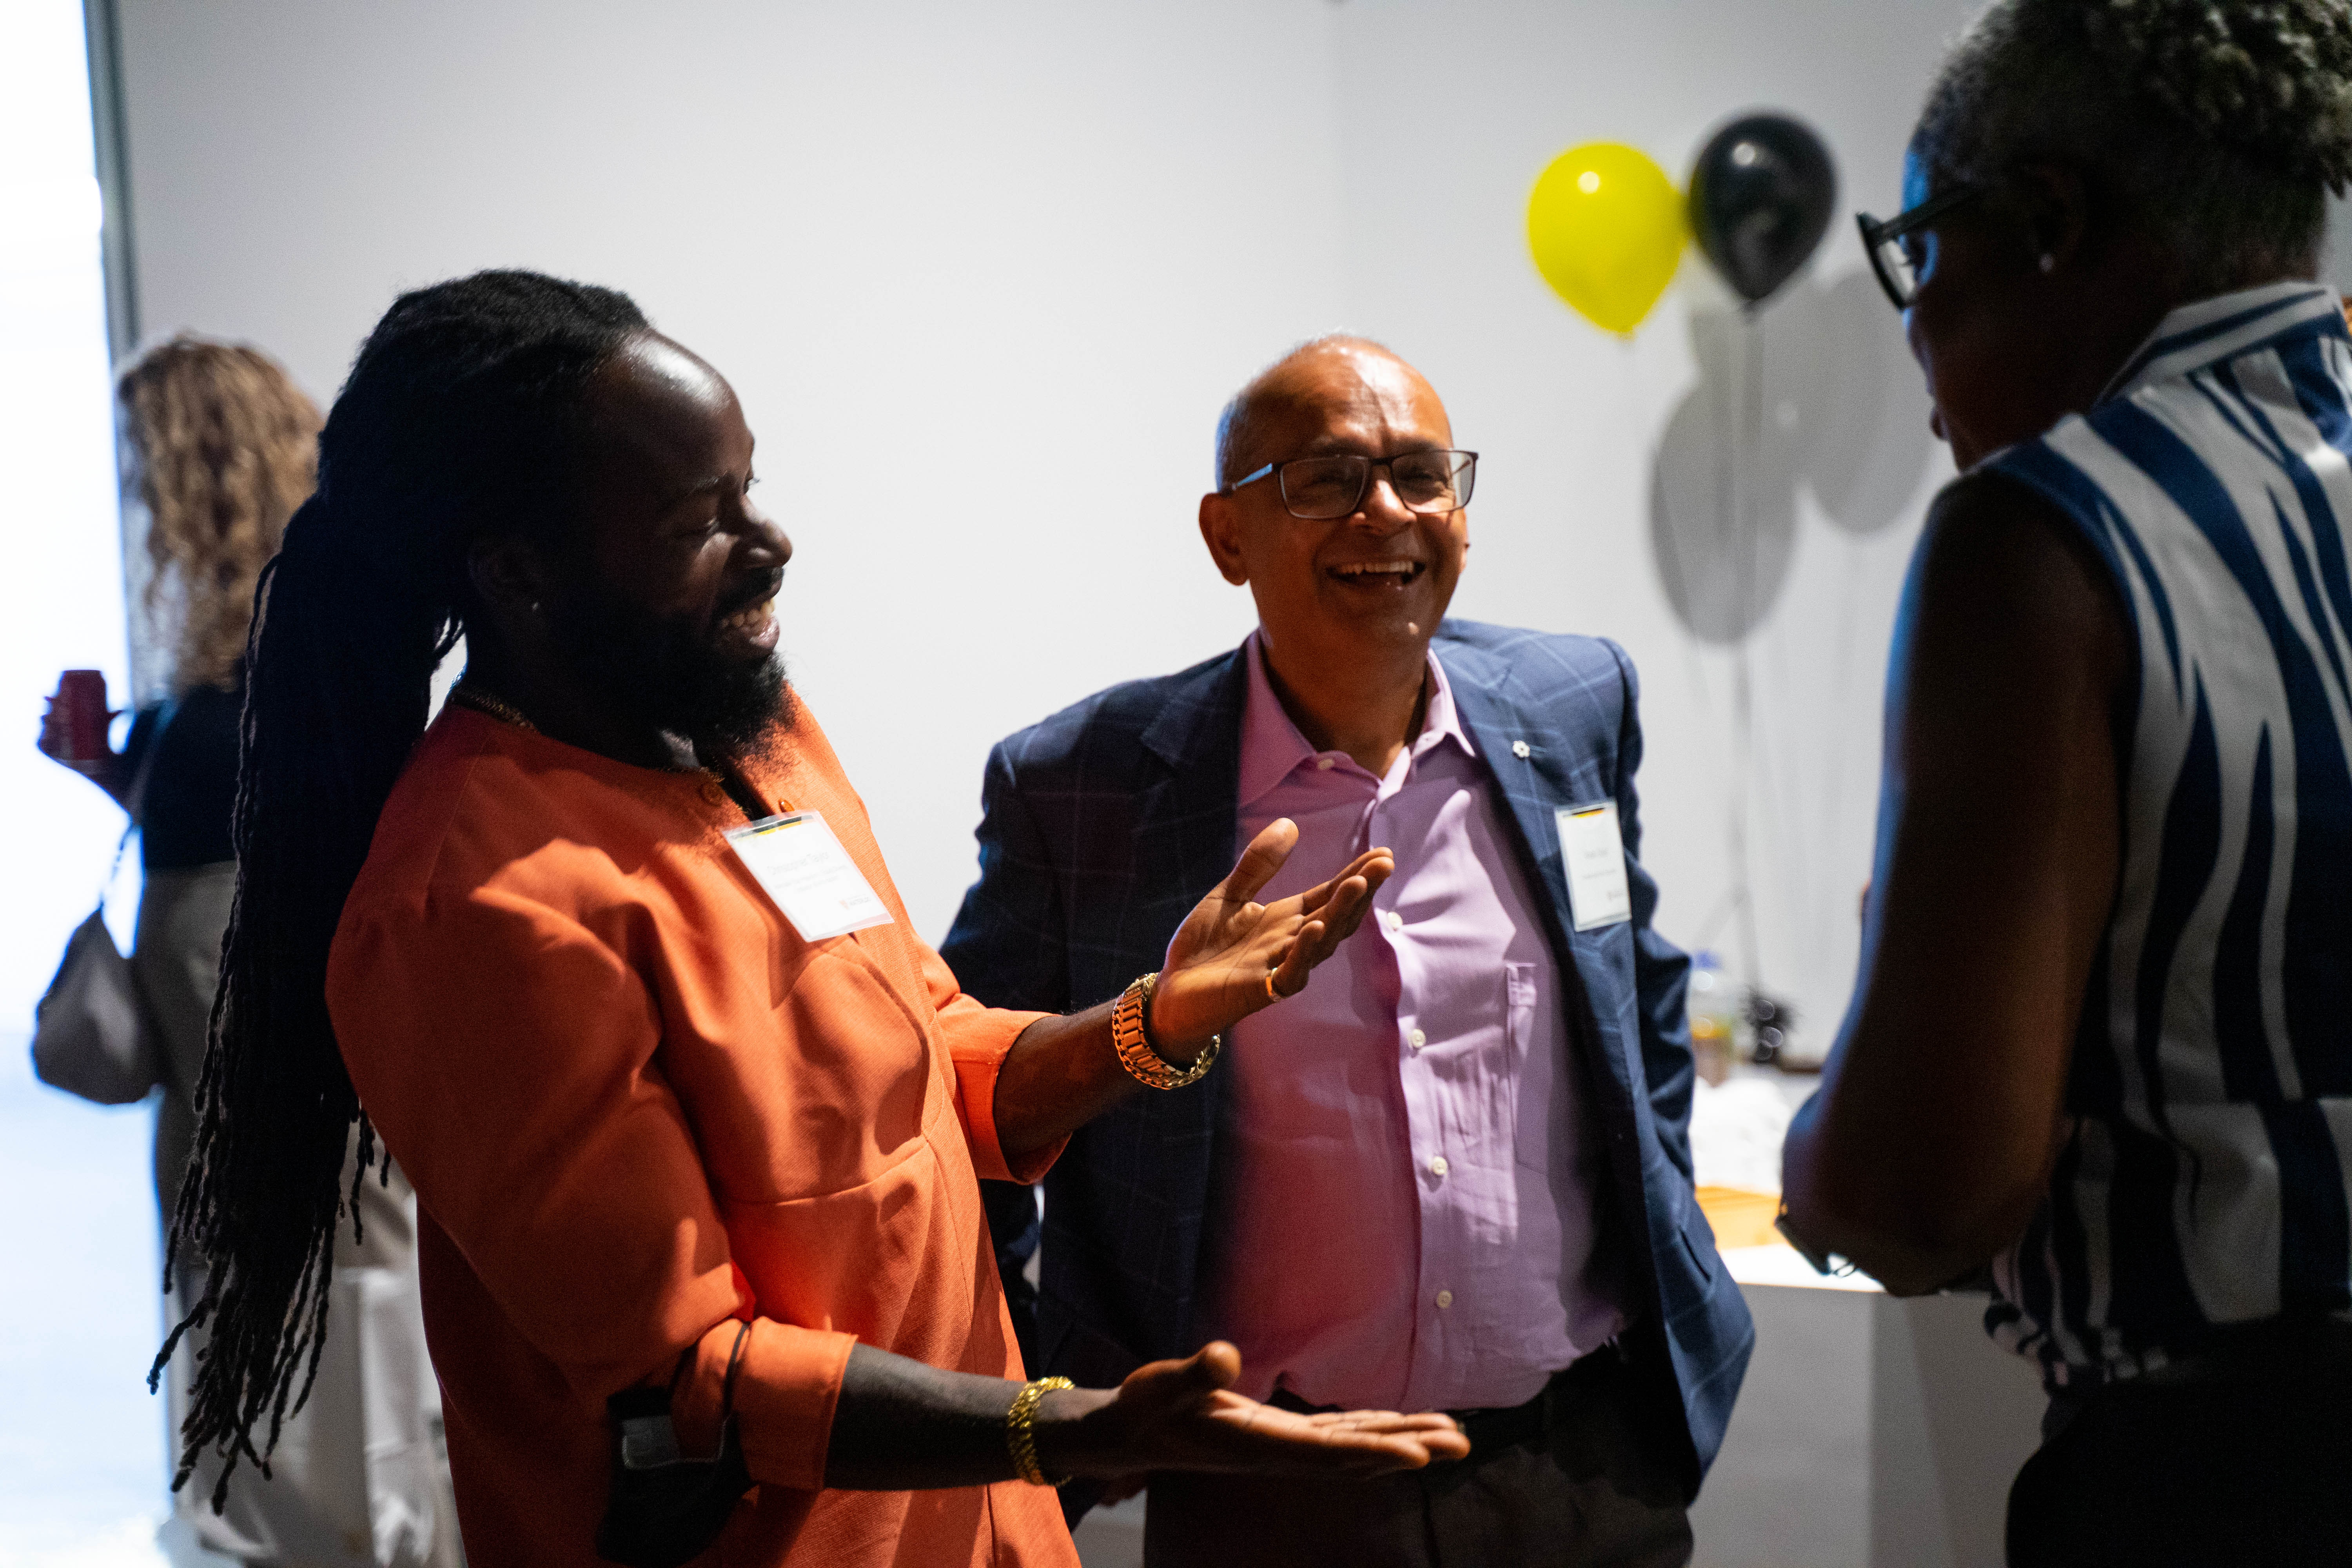 President Goel at the Black Excellence Meet and Greet event